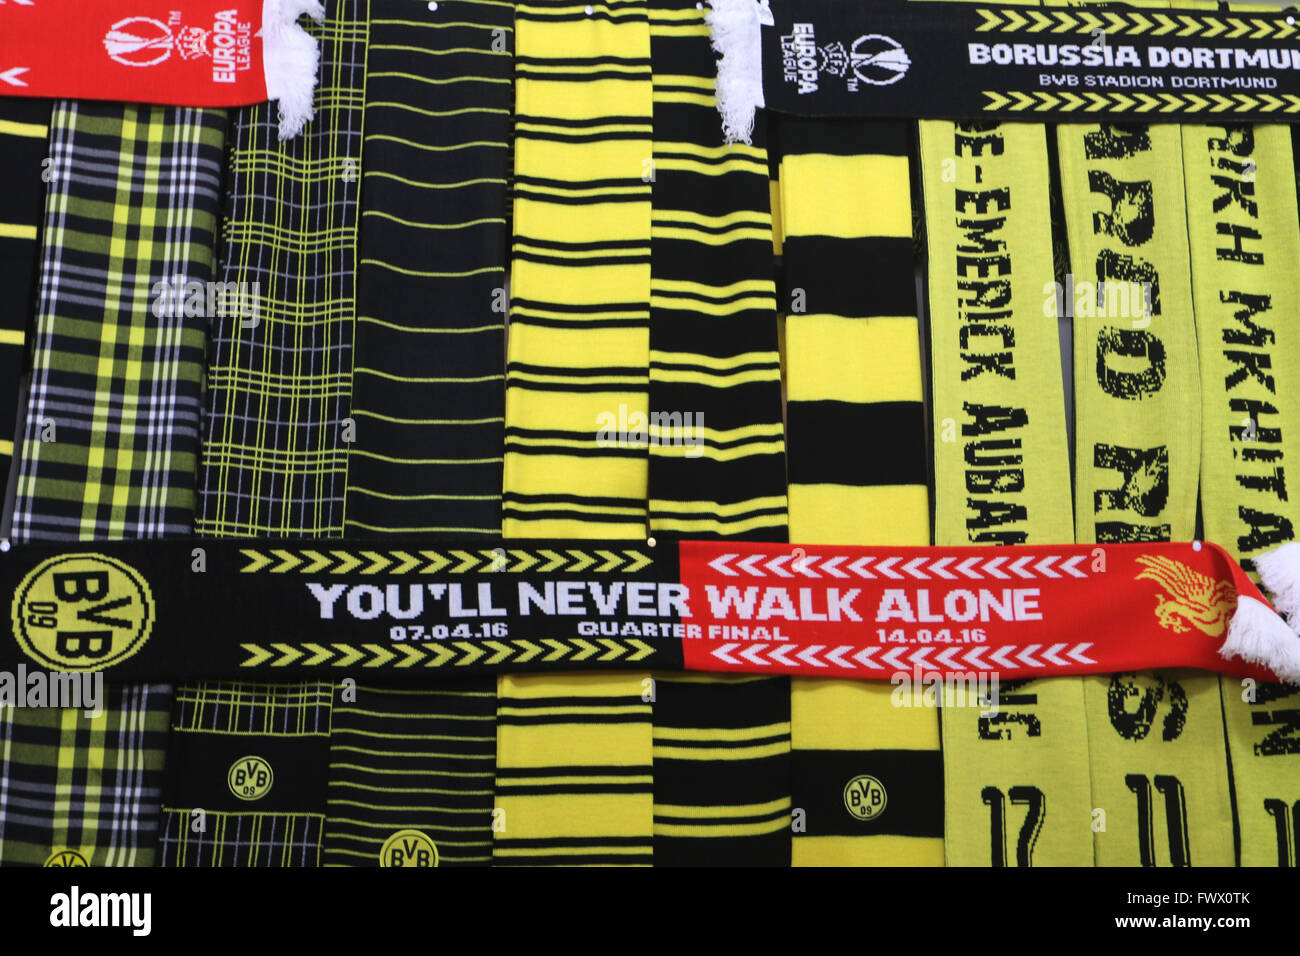 Dortmund, Germany. 7th Apr, 2016. Fan scrafs of soccer clubs Borussia Dortmund and FC Liverpool are on display at a sales shop at the Signal Iduna Park soccer stadium, prior to the Europa League knock out quarter finals between Borussia Dortmund vs FC Liverpool in Dortmund, Germany, 7 April 2016. Photo: Ina Fassbender/dpa/Alamy Live News Stock Photo